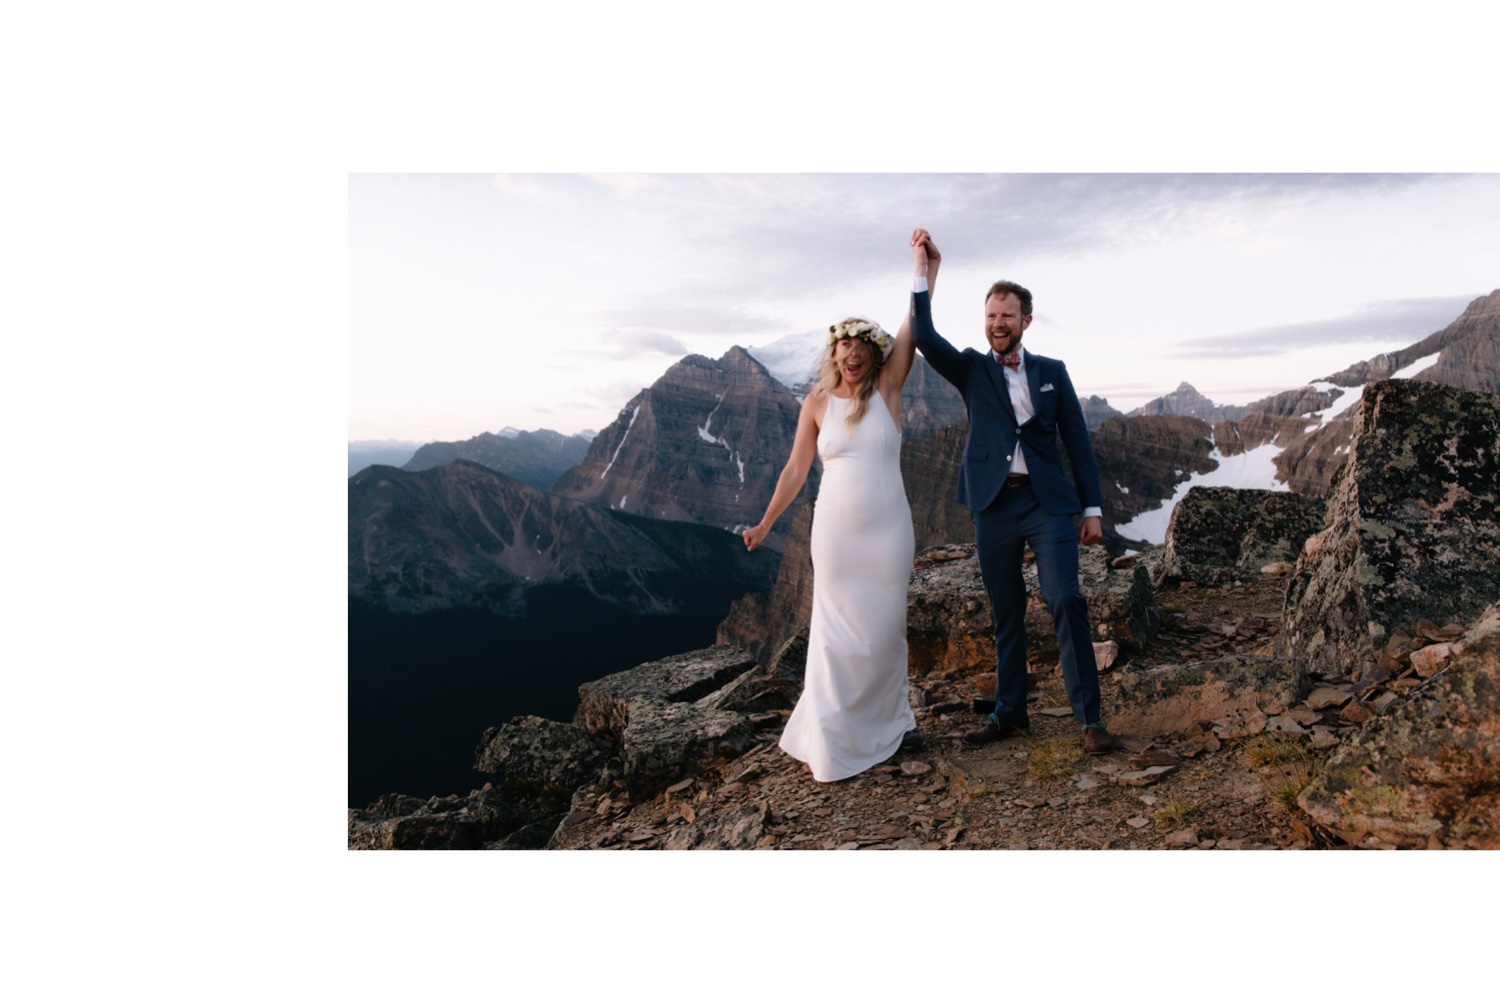 Eloped couple raising arms together in celebration after being announced husband and wife atop Fairview Mountain in Banff